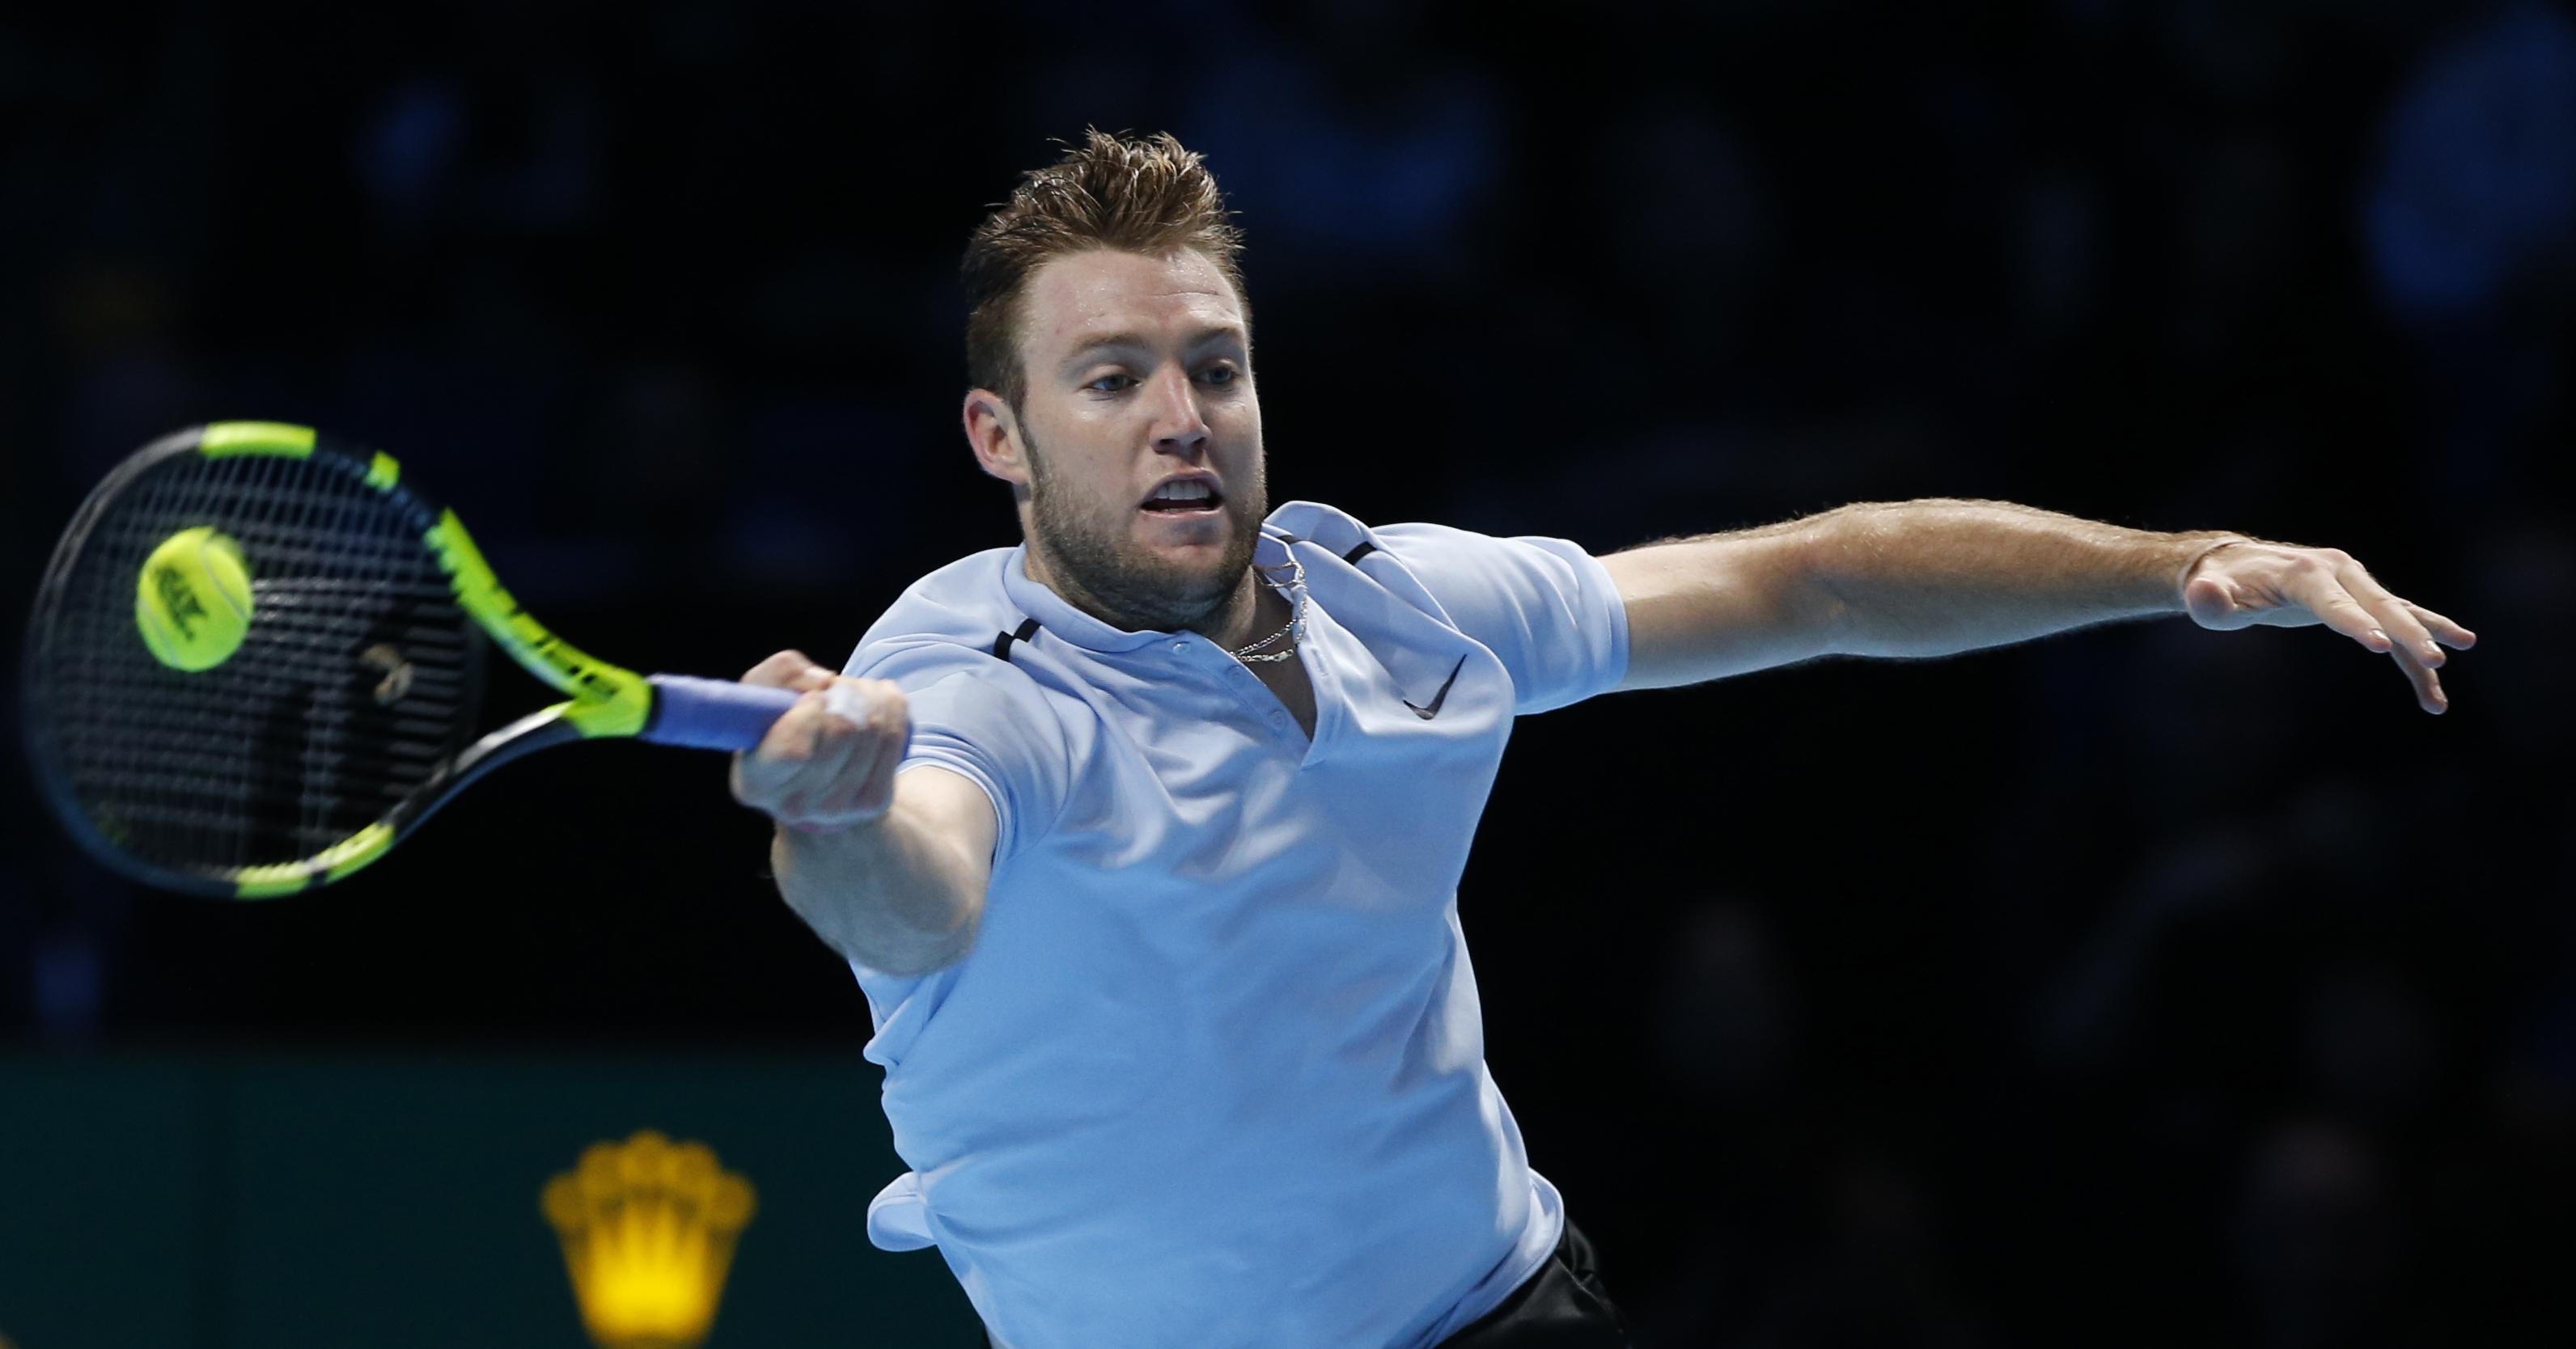 Jack Sock advances with Roger Federer to semifinals at ATP Finals | The Spokesman-Review3184 x 1668